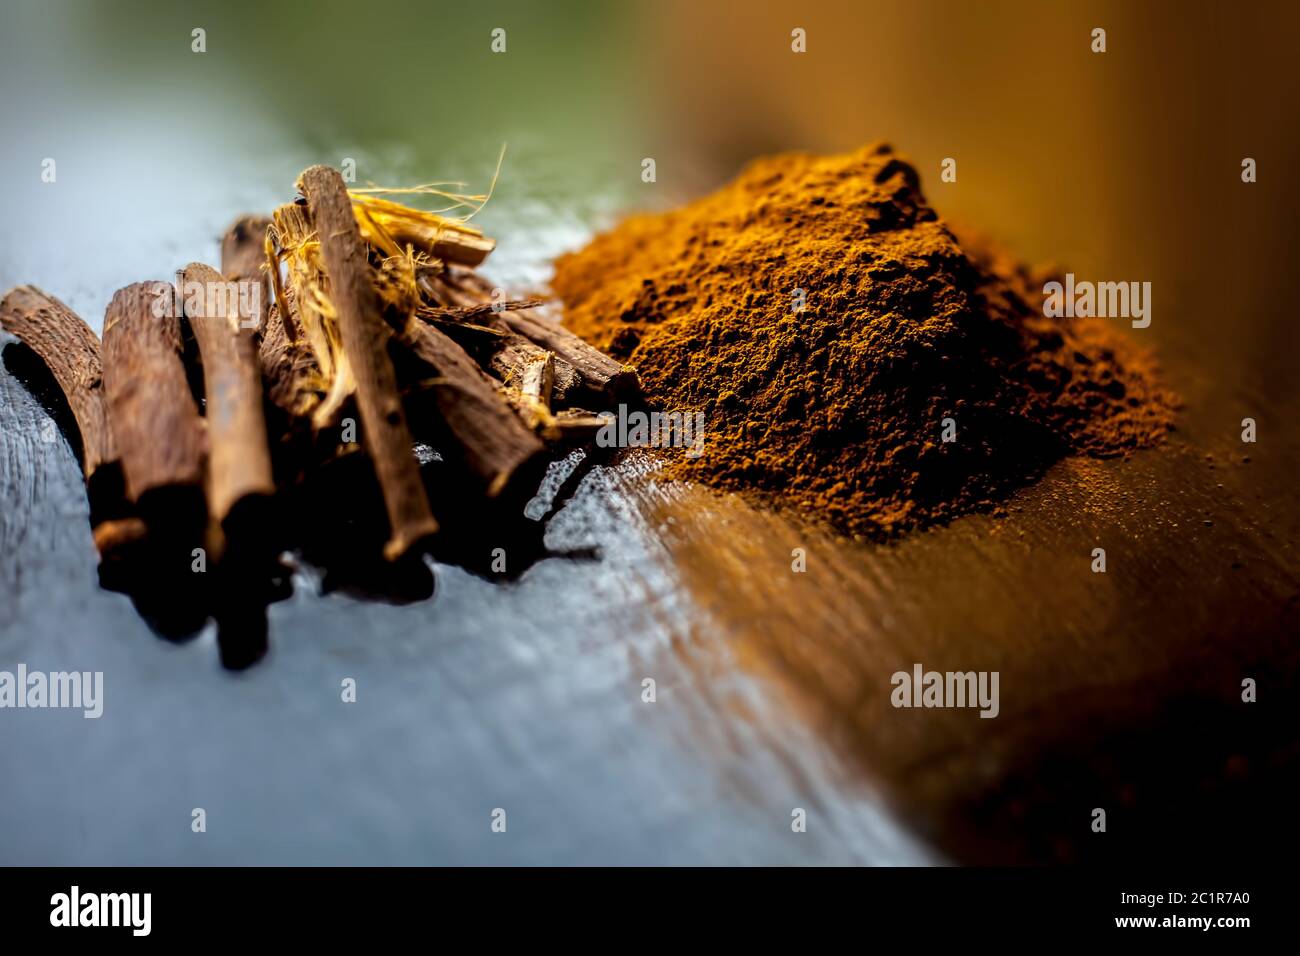 Shot of raw revand chini powder along with its raw root on a wooden surface. Shot in dark gothic colors. Stock Photo